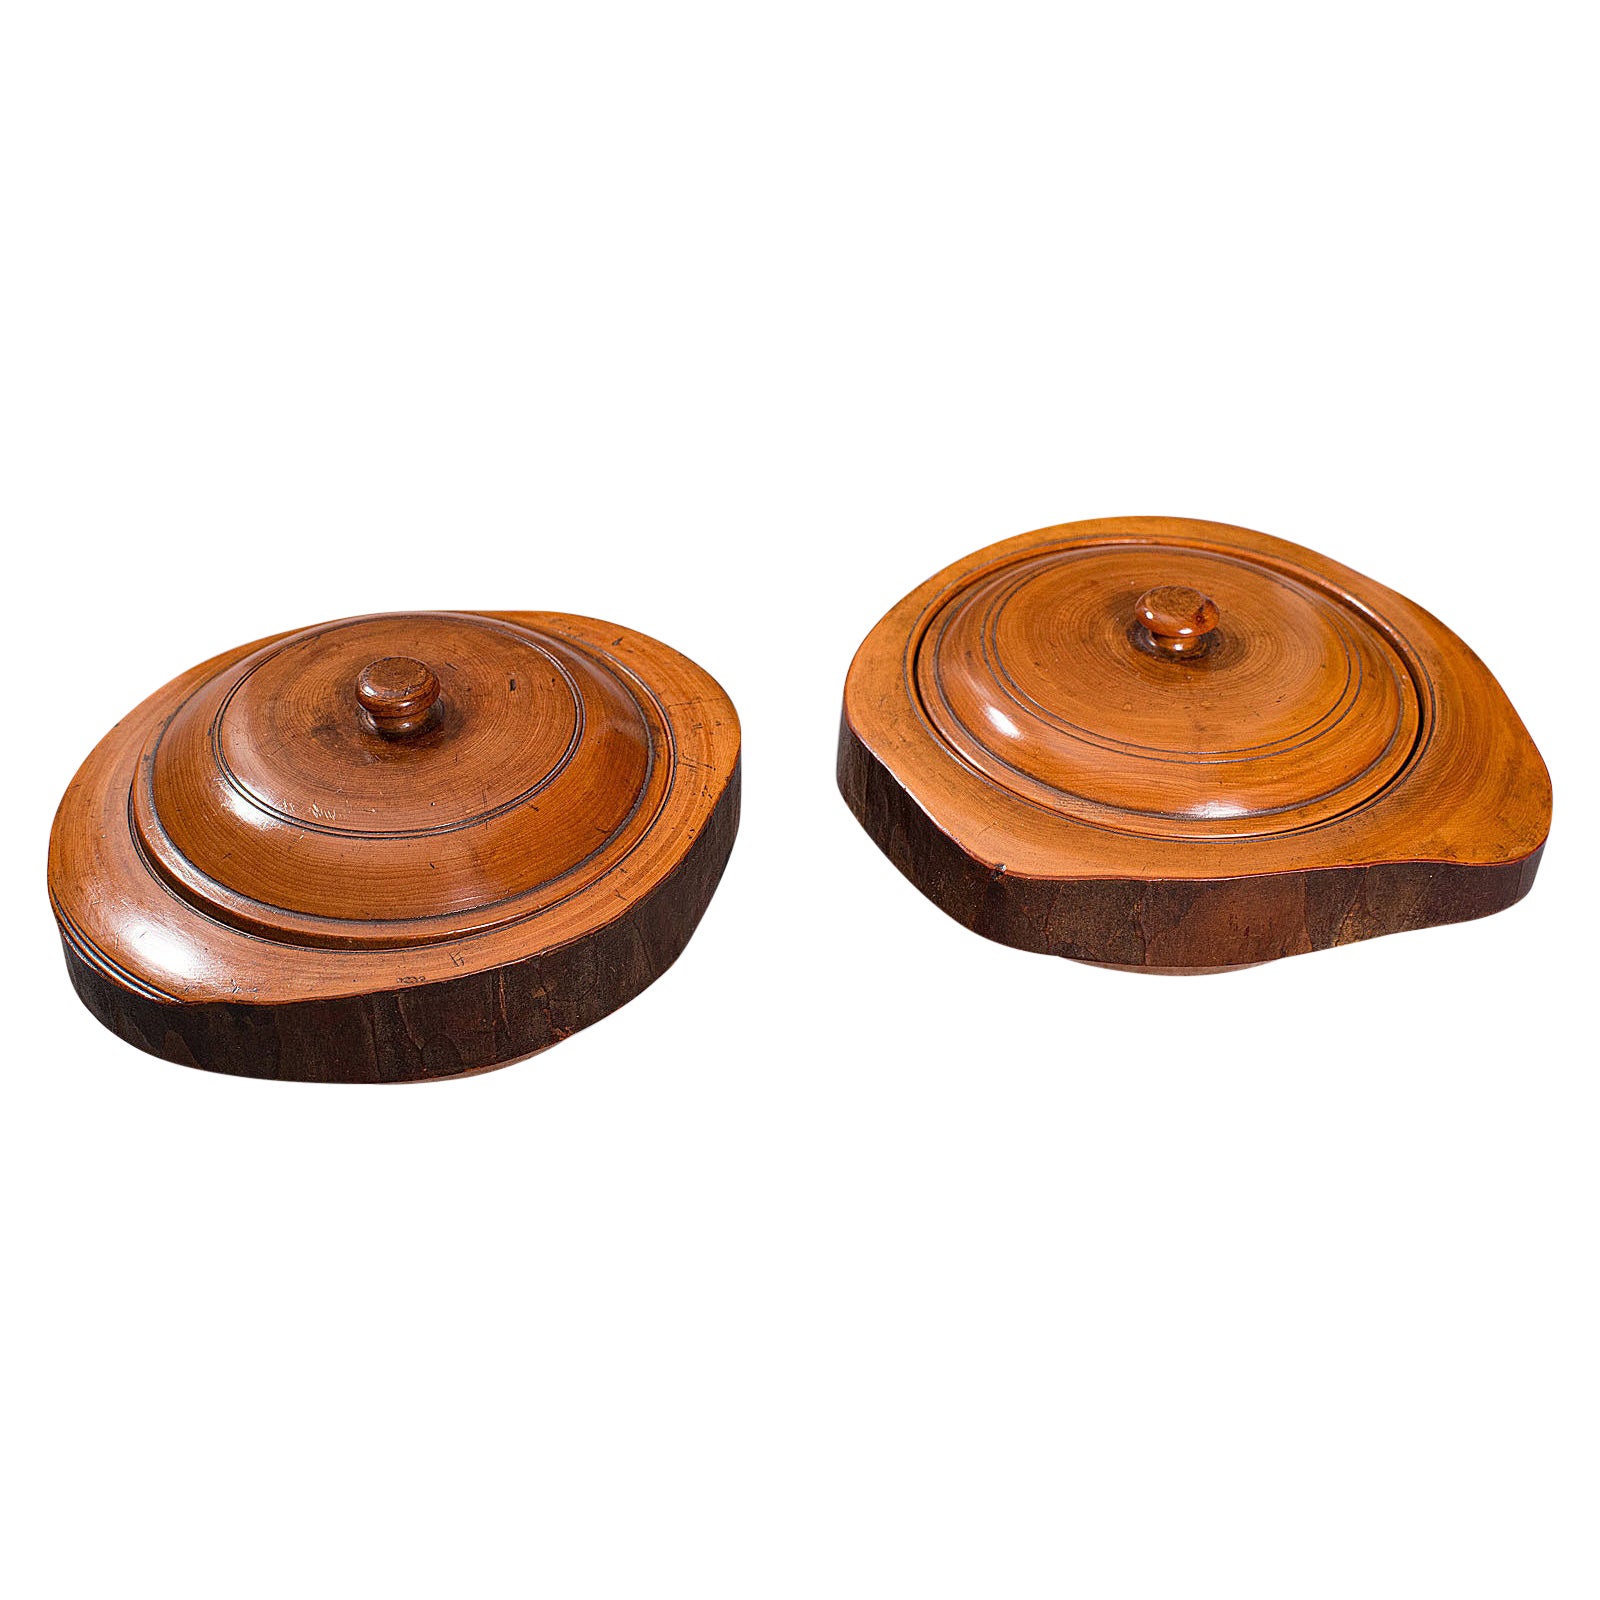 Pair of Antique Carved Lidded Bowls, Treen, English, Yew, Victorian, circa 1900